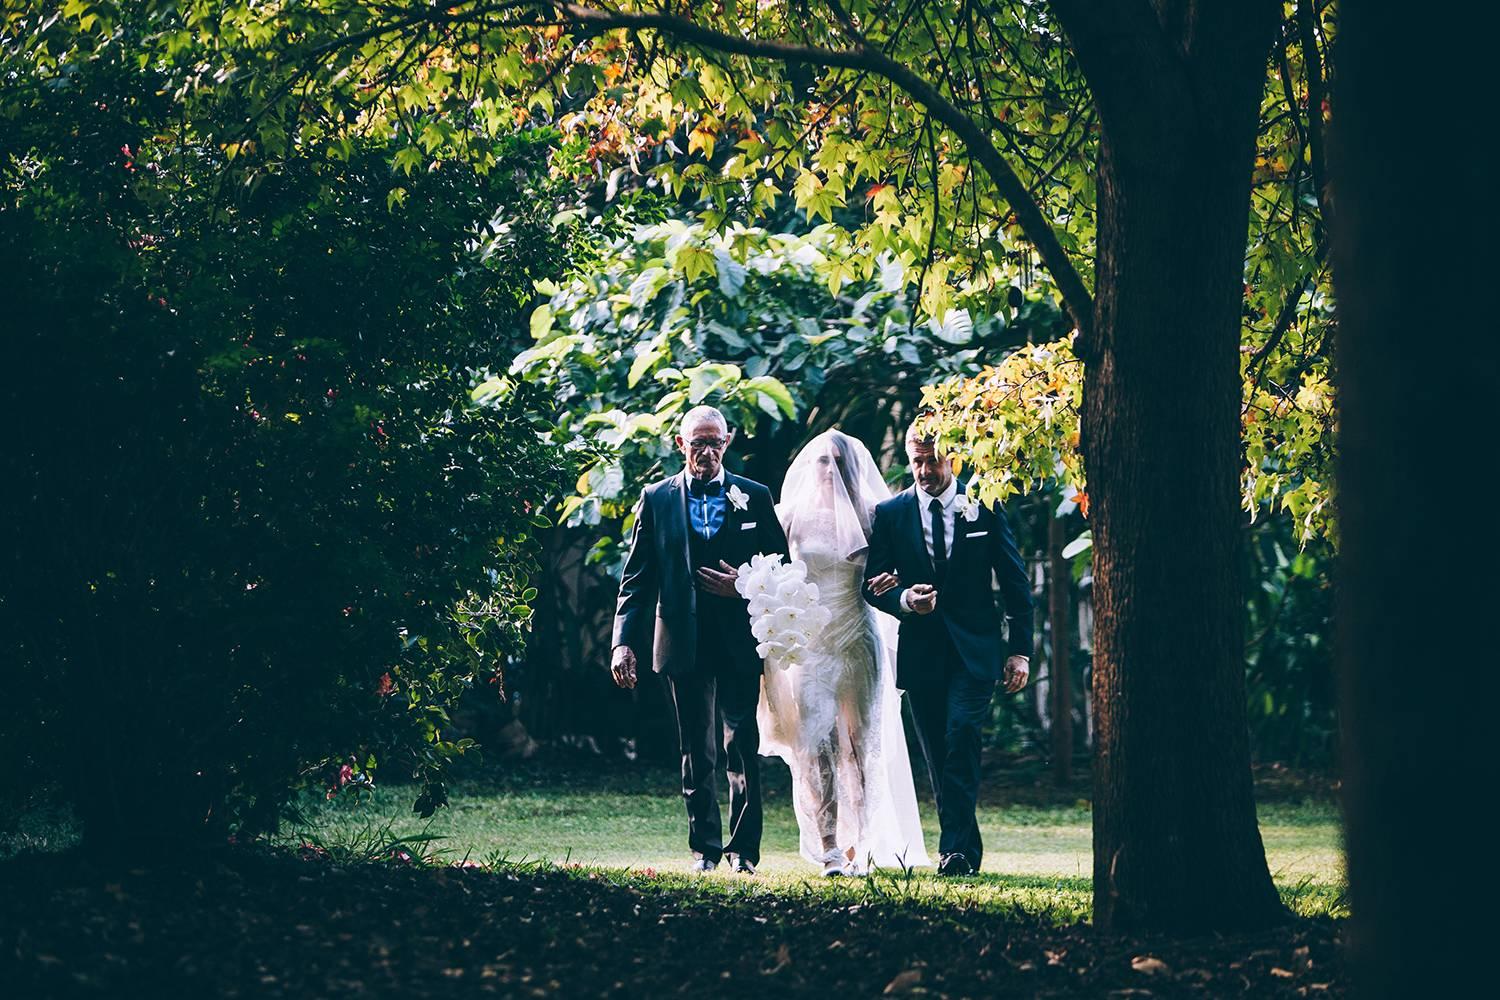 Photographed by Gavin Wyatt, officiated by Modern Love Ceremonies